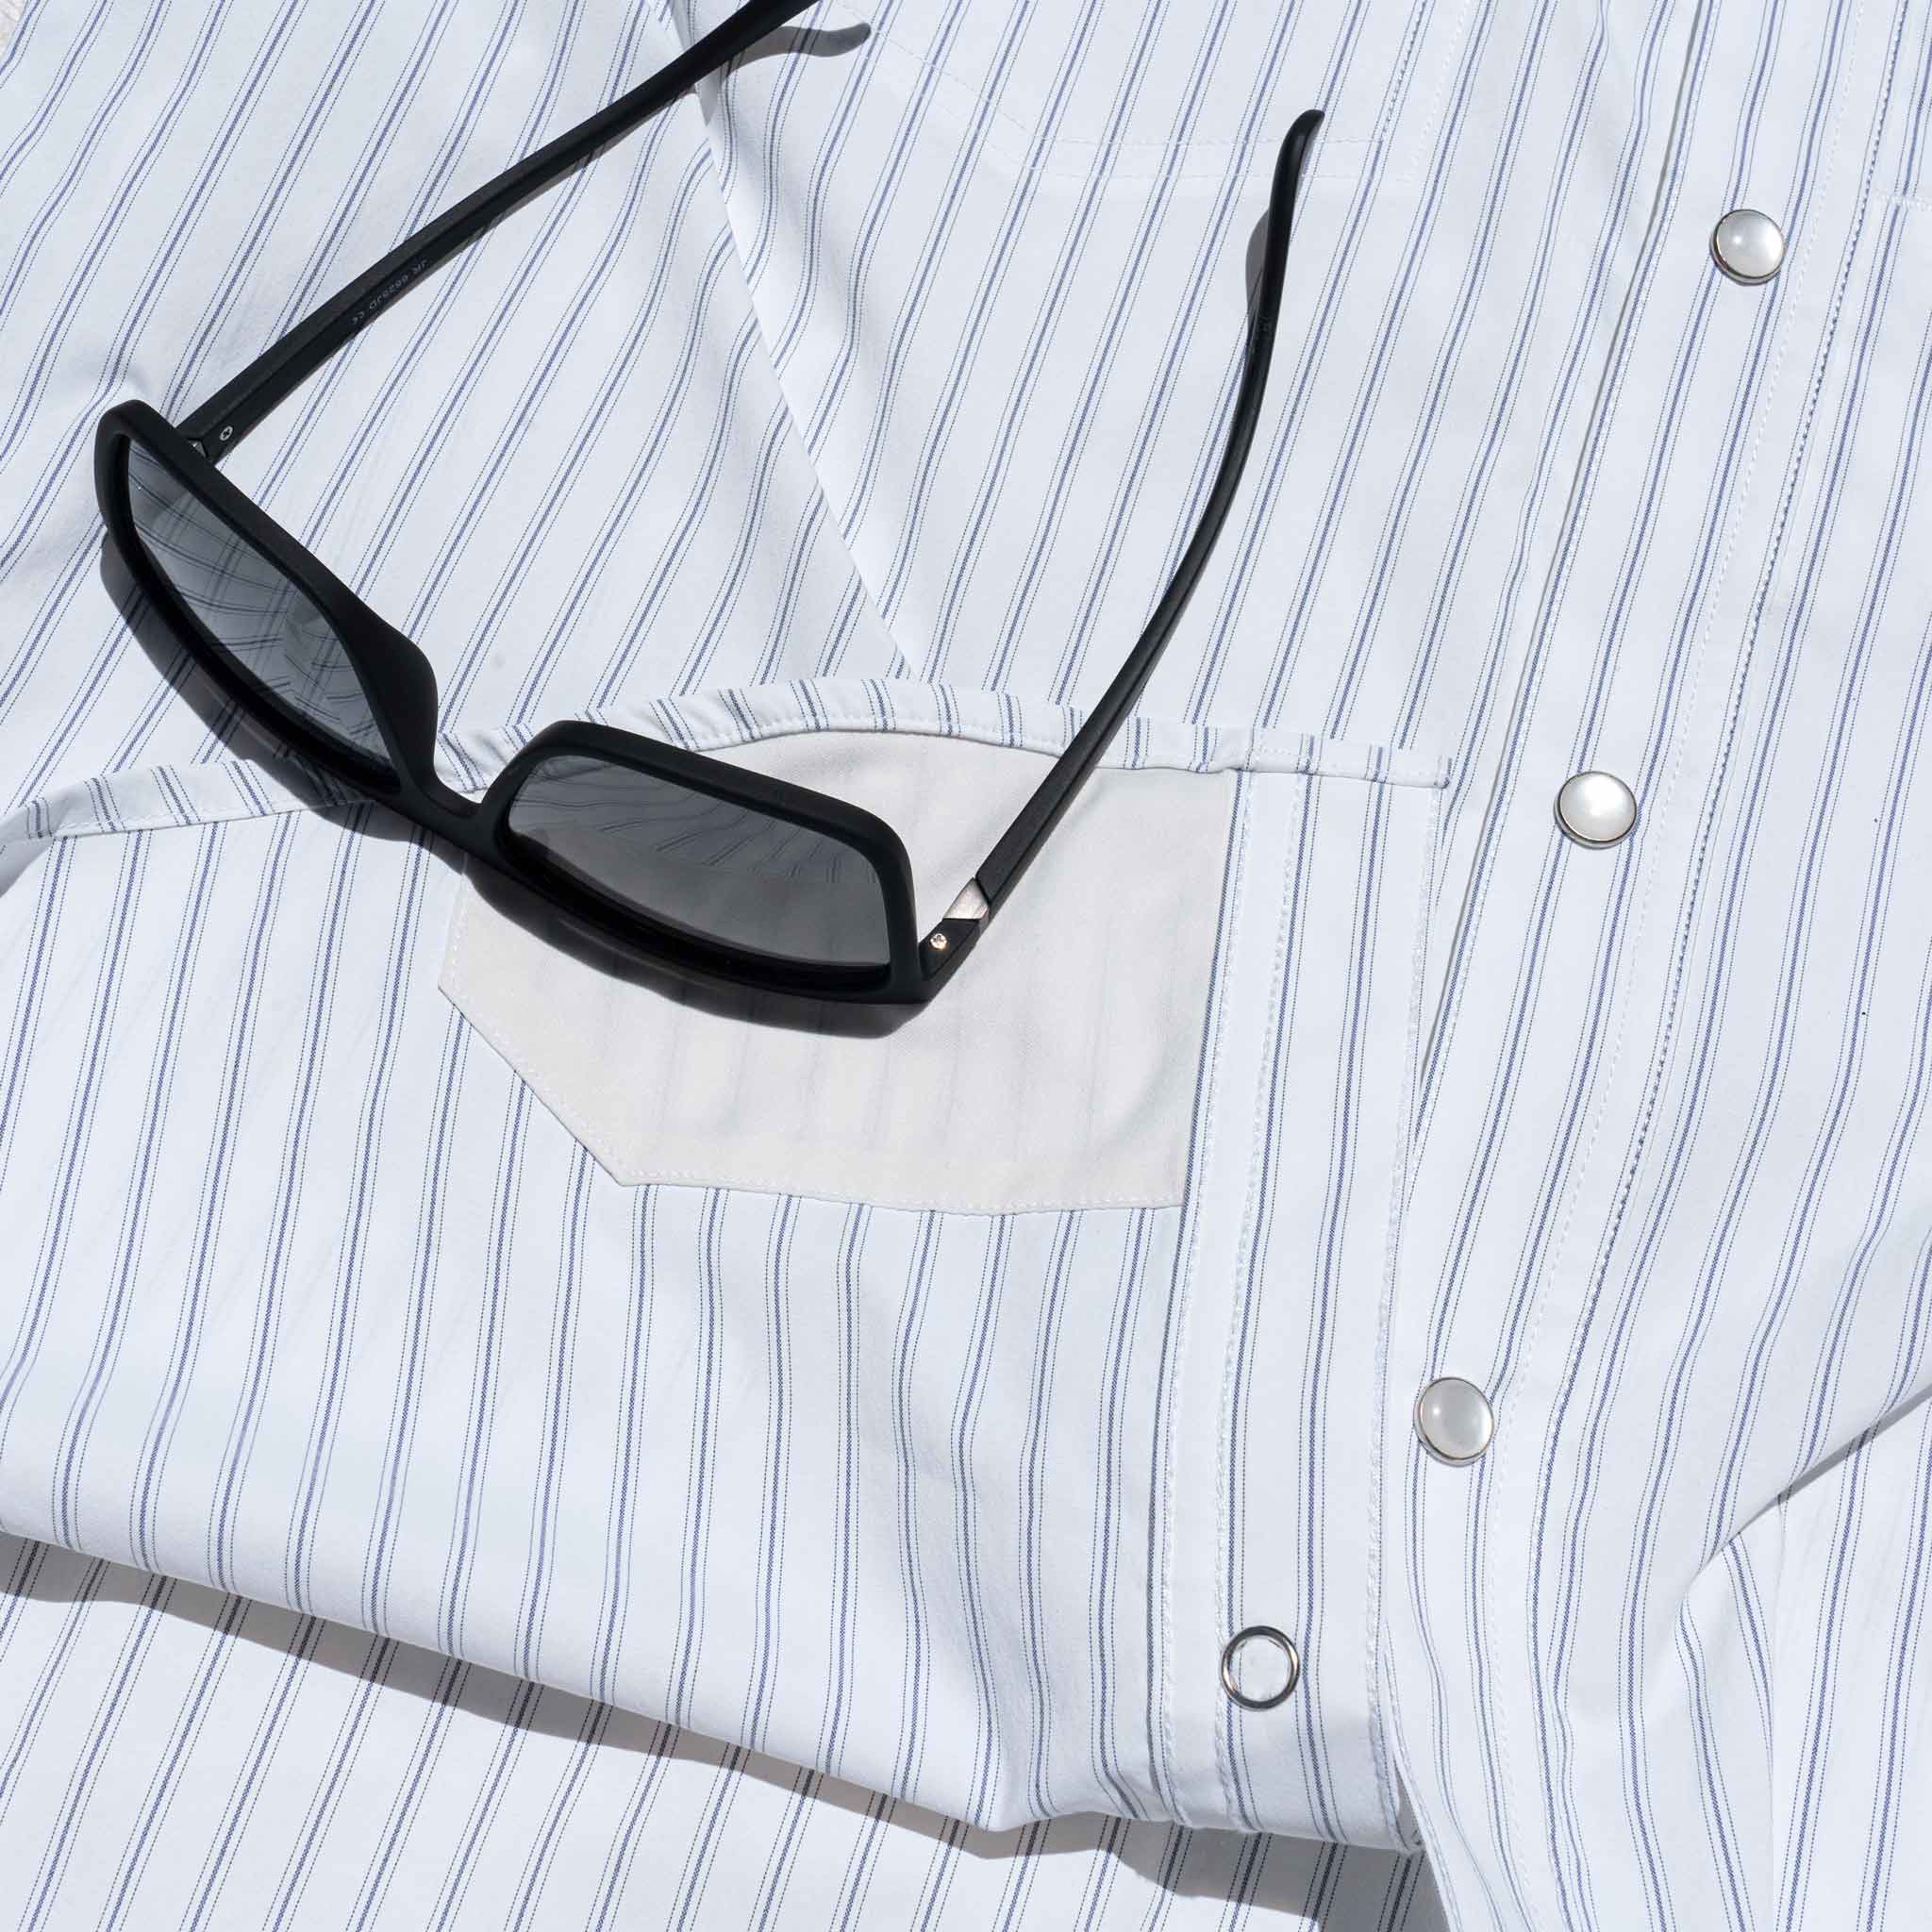 Close up of sunglasses on top of lens cloth of a striped shirt